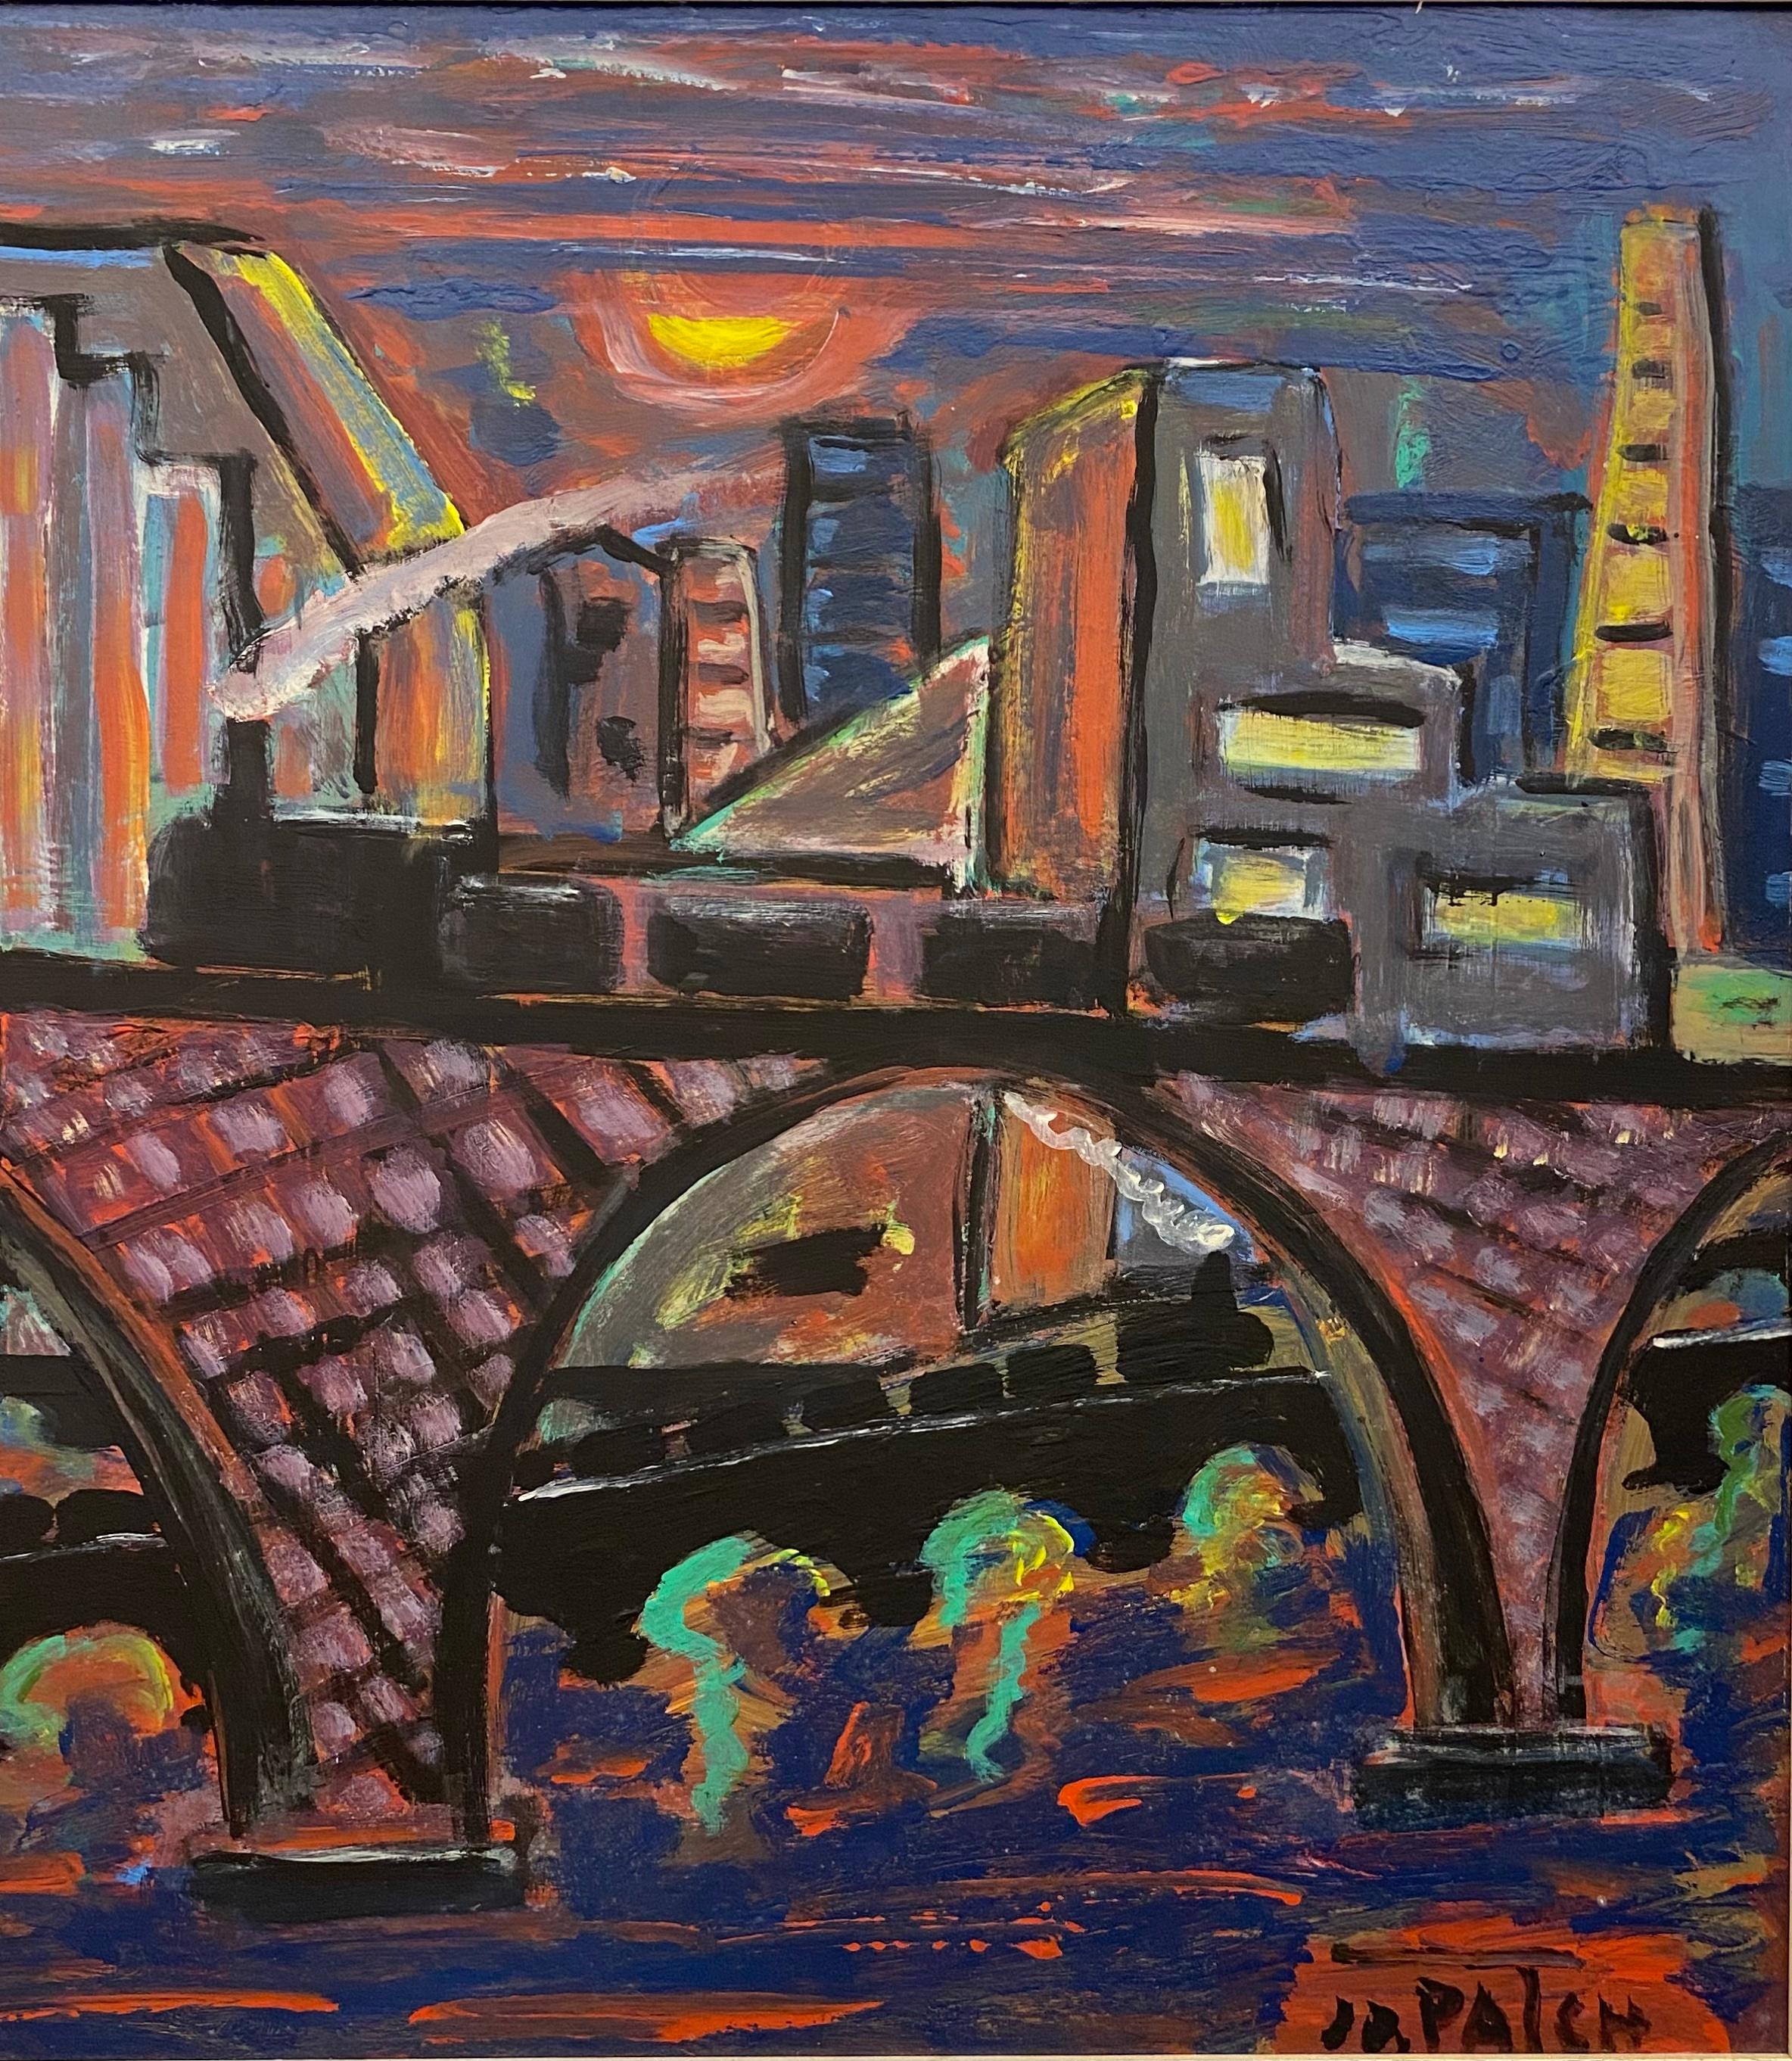 Oil on board painting by Jo Patch. 
A very colorful piece of decorative artwork that depicts a cityscape scene by a river or bay. Perhaps this is a view from somewhere in New York City. 

Jo Patch born in Opprebais on January 13, 1937. He was active